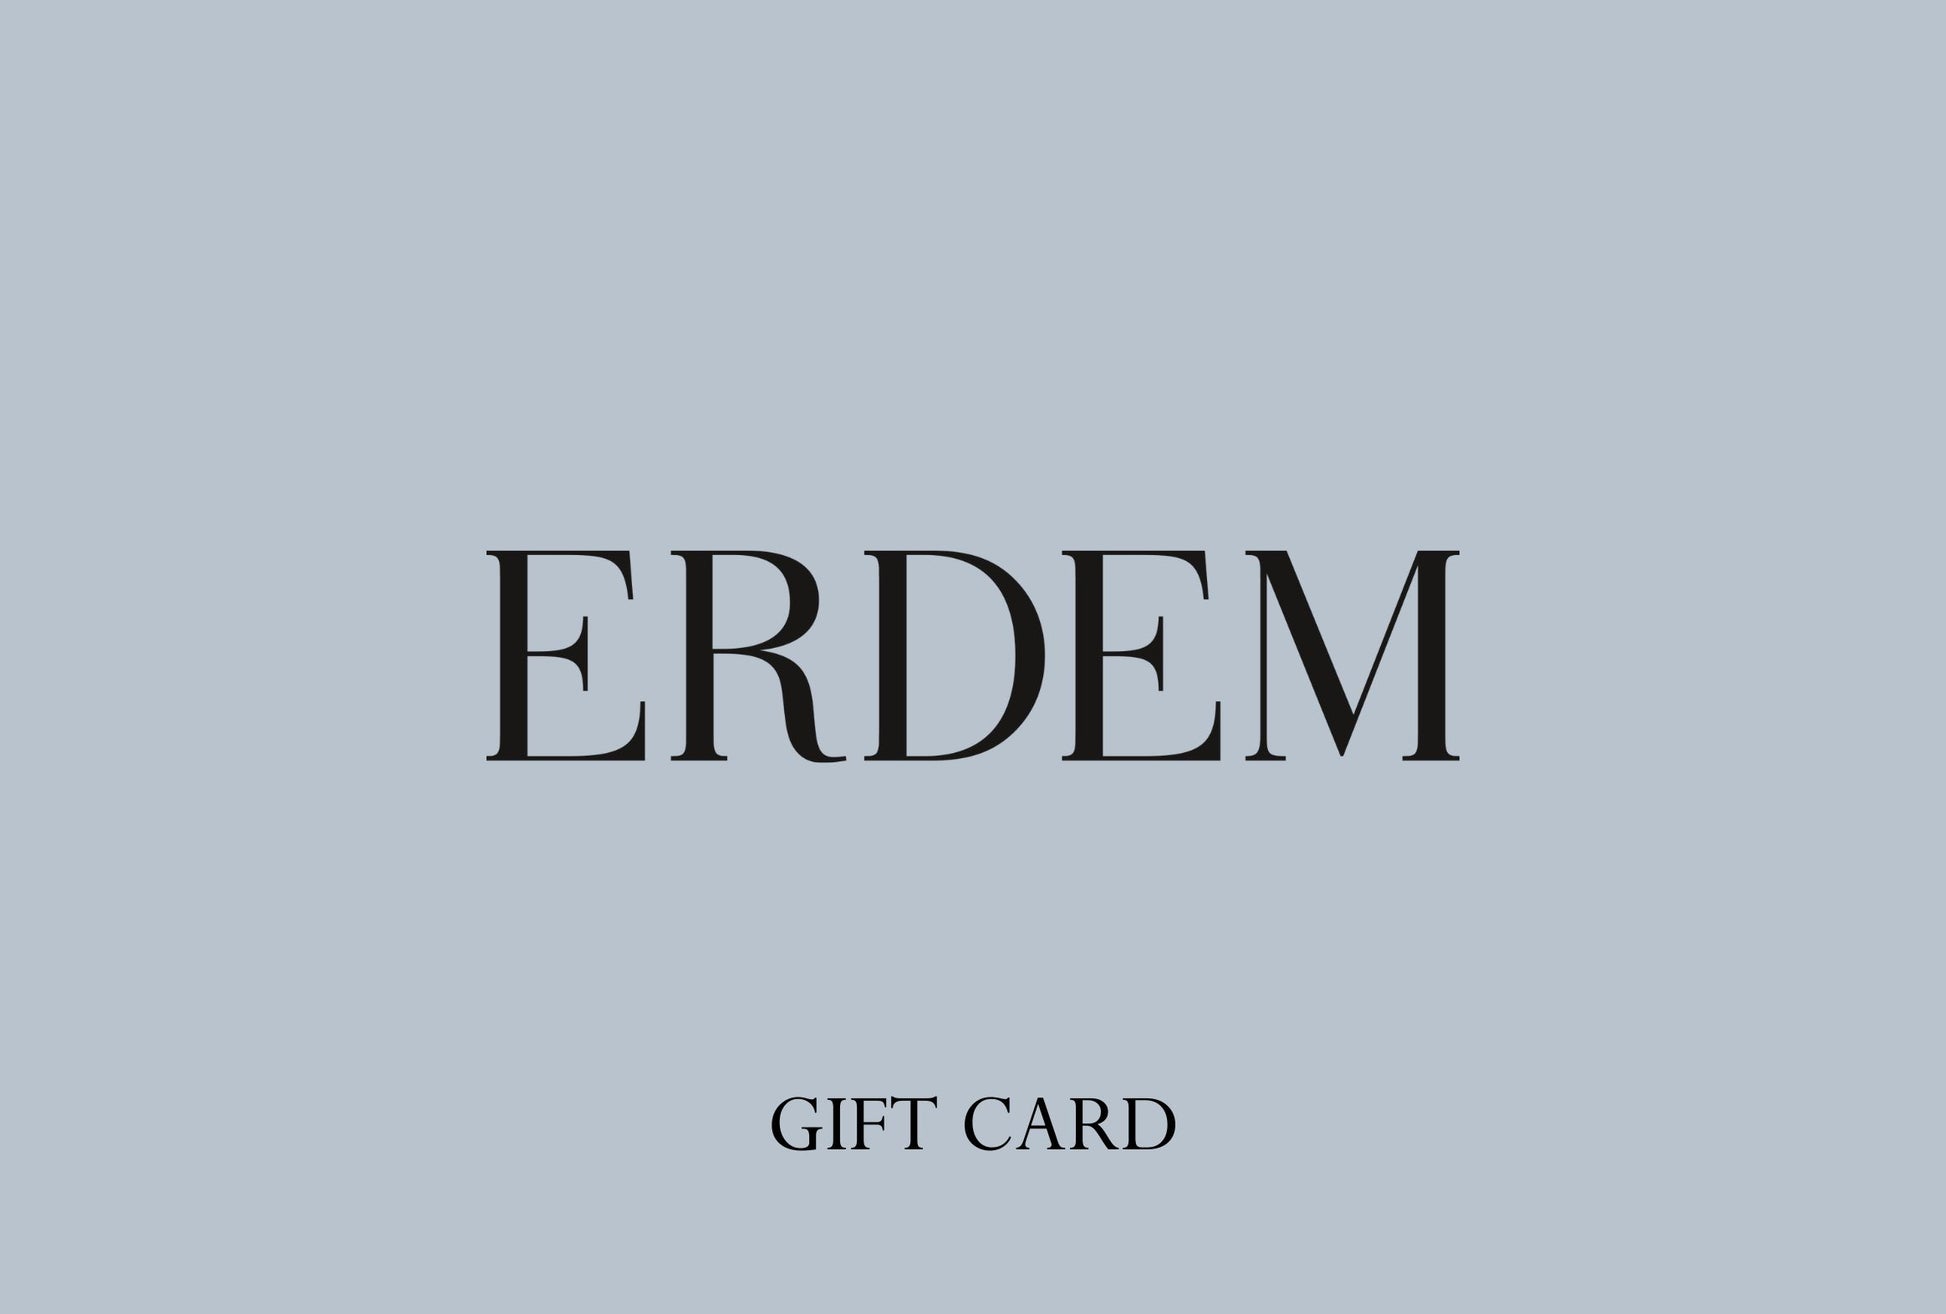 A grey square with the writing ERDEM and Gift Card. The image represents a gift card you can buy from Erdem to allow someone to choose their own luxury women's clothing from Erdem. 